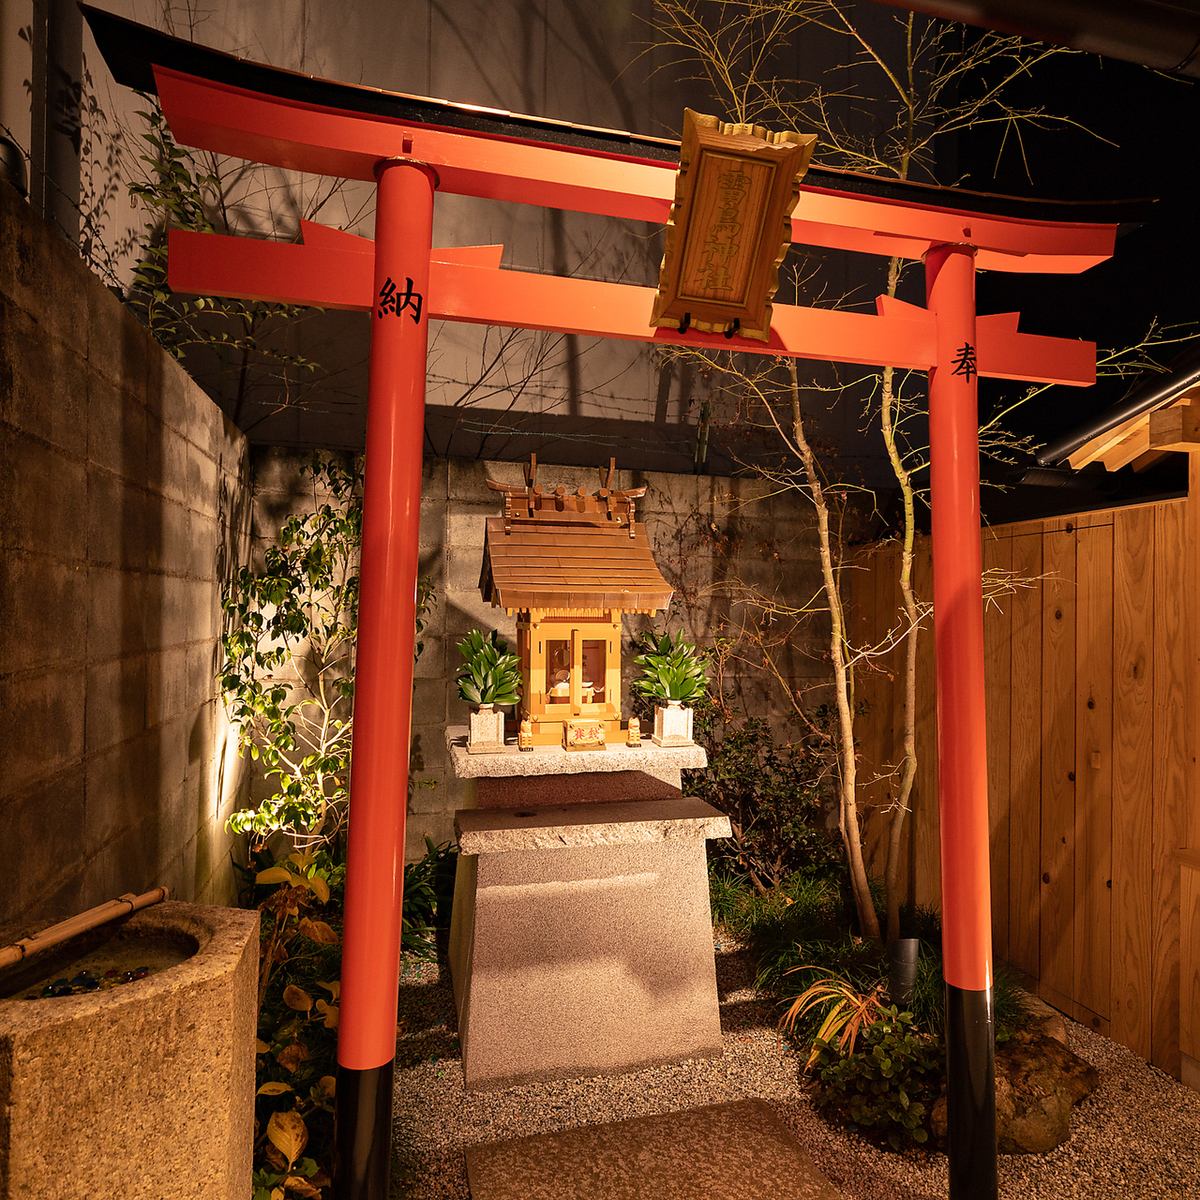 There is a torii gate in the store.Visit the shrine and make a toast! You can even start with a drink!